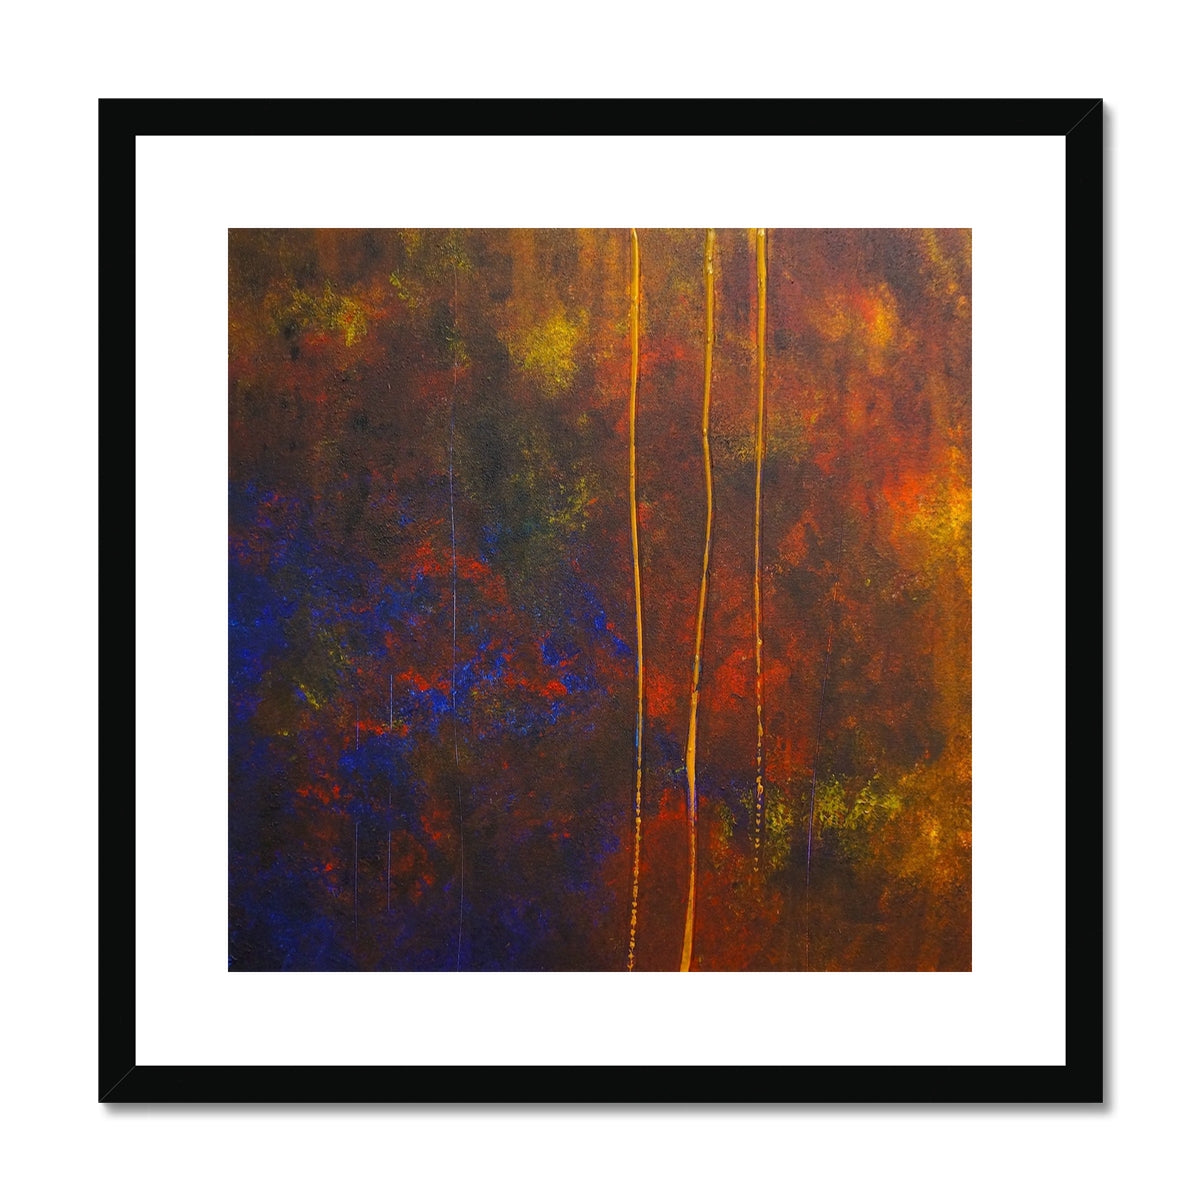 The Autumn Wood Abstract Painting | Framed & Mounted Prints From Scotland-Framed & Mounted Prints-Abstract & Impressionistic Art Gallery-20"x20"-Black Frame-Paintings, Prints, Homeware, Art Gifts From Scotland By Scottish Artist Kevin Hunter